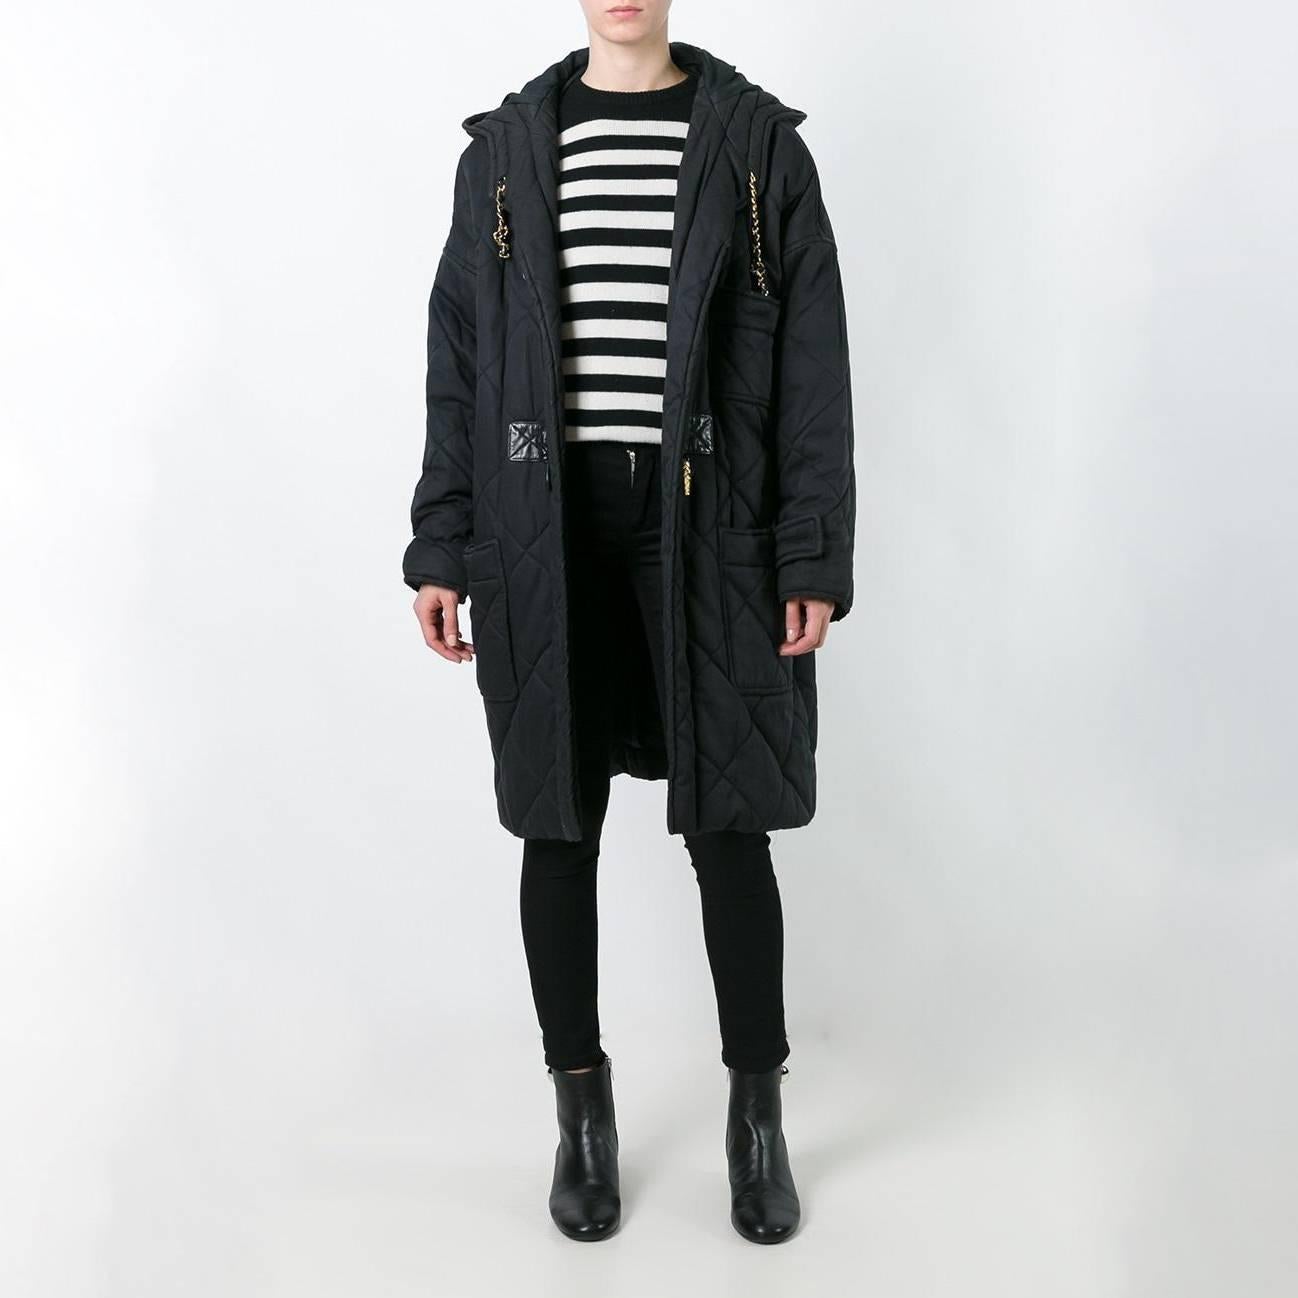 Stay warm in style with this vintage Chanel duffle coat. A classic black, padded gabardine coat is elevated with the brand’s signature codes, including an all-over quilting, a woven chain drawstring around the hood, and embossed gold-tone toggles